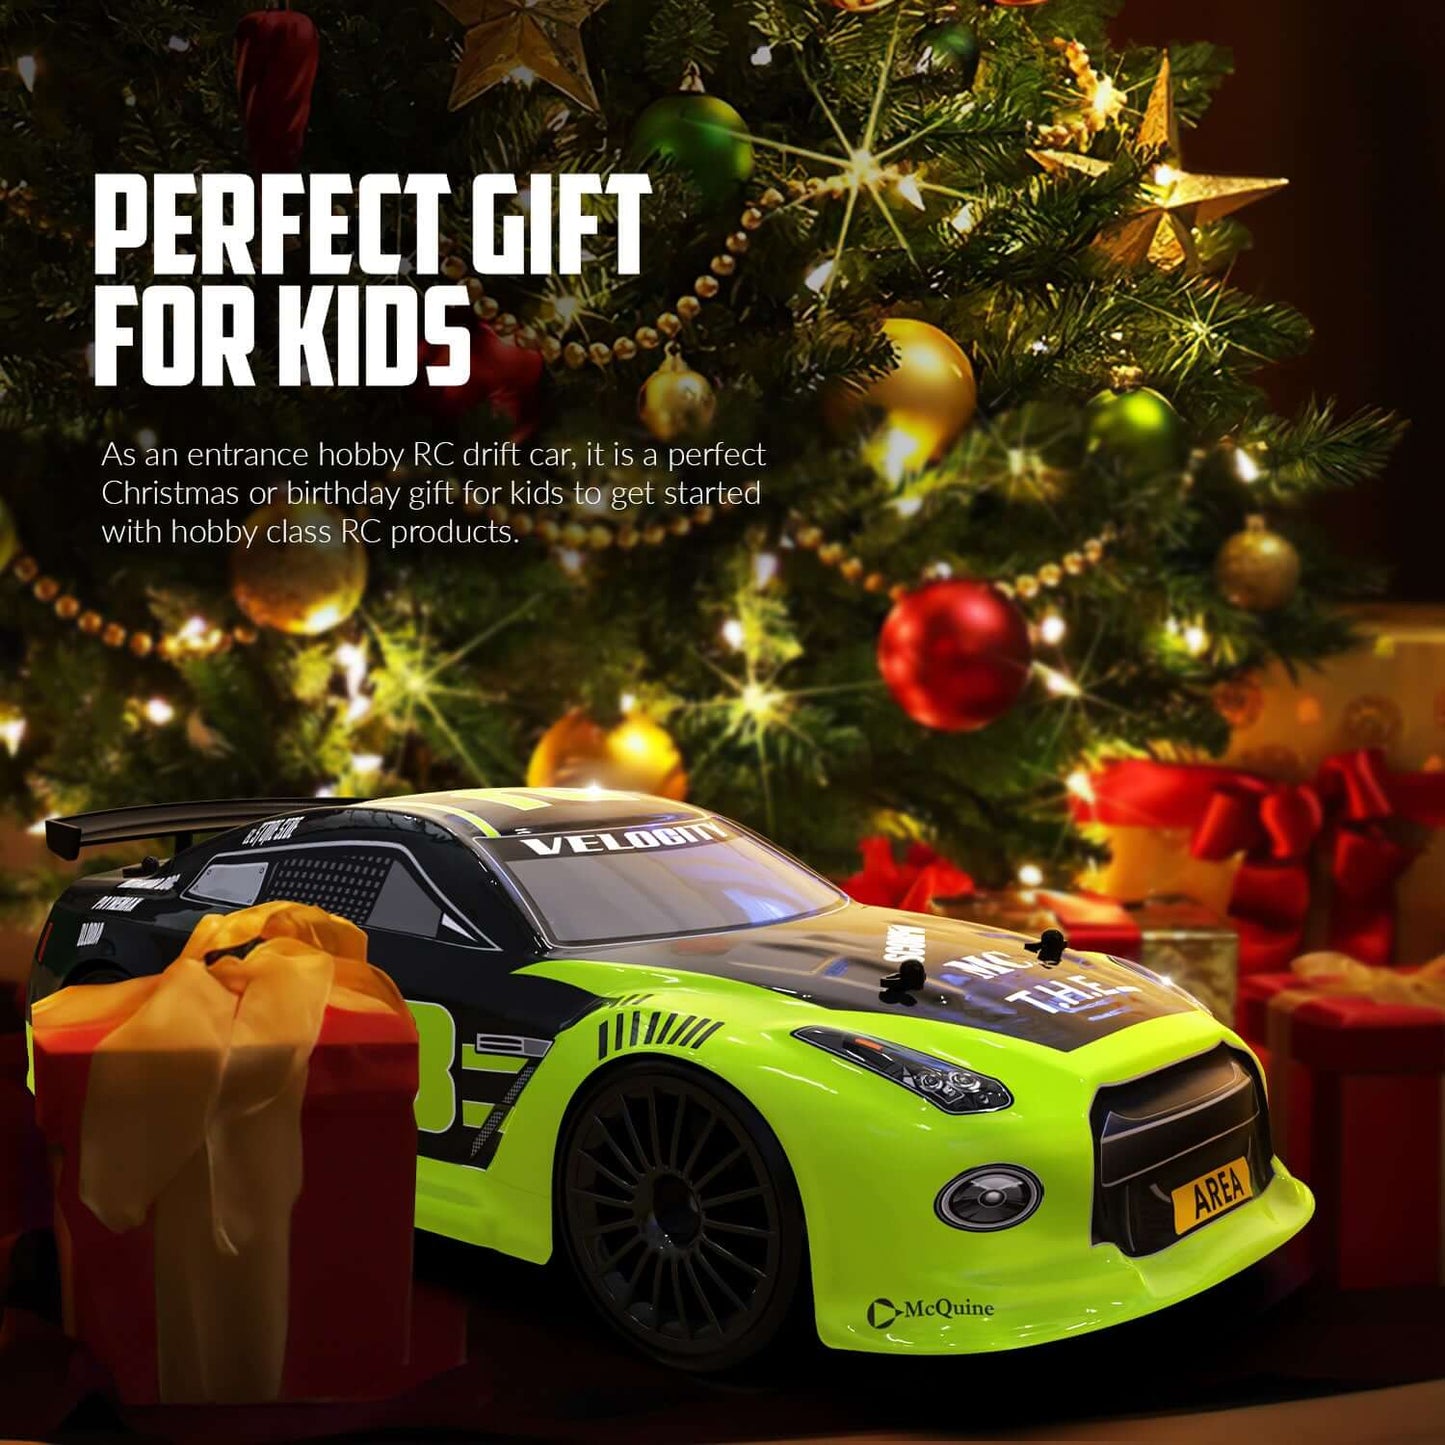 Racent 1/14 Scale High-Speed RC Drift Car with LED Lights | KIDS TOY LOVER